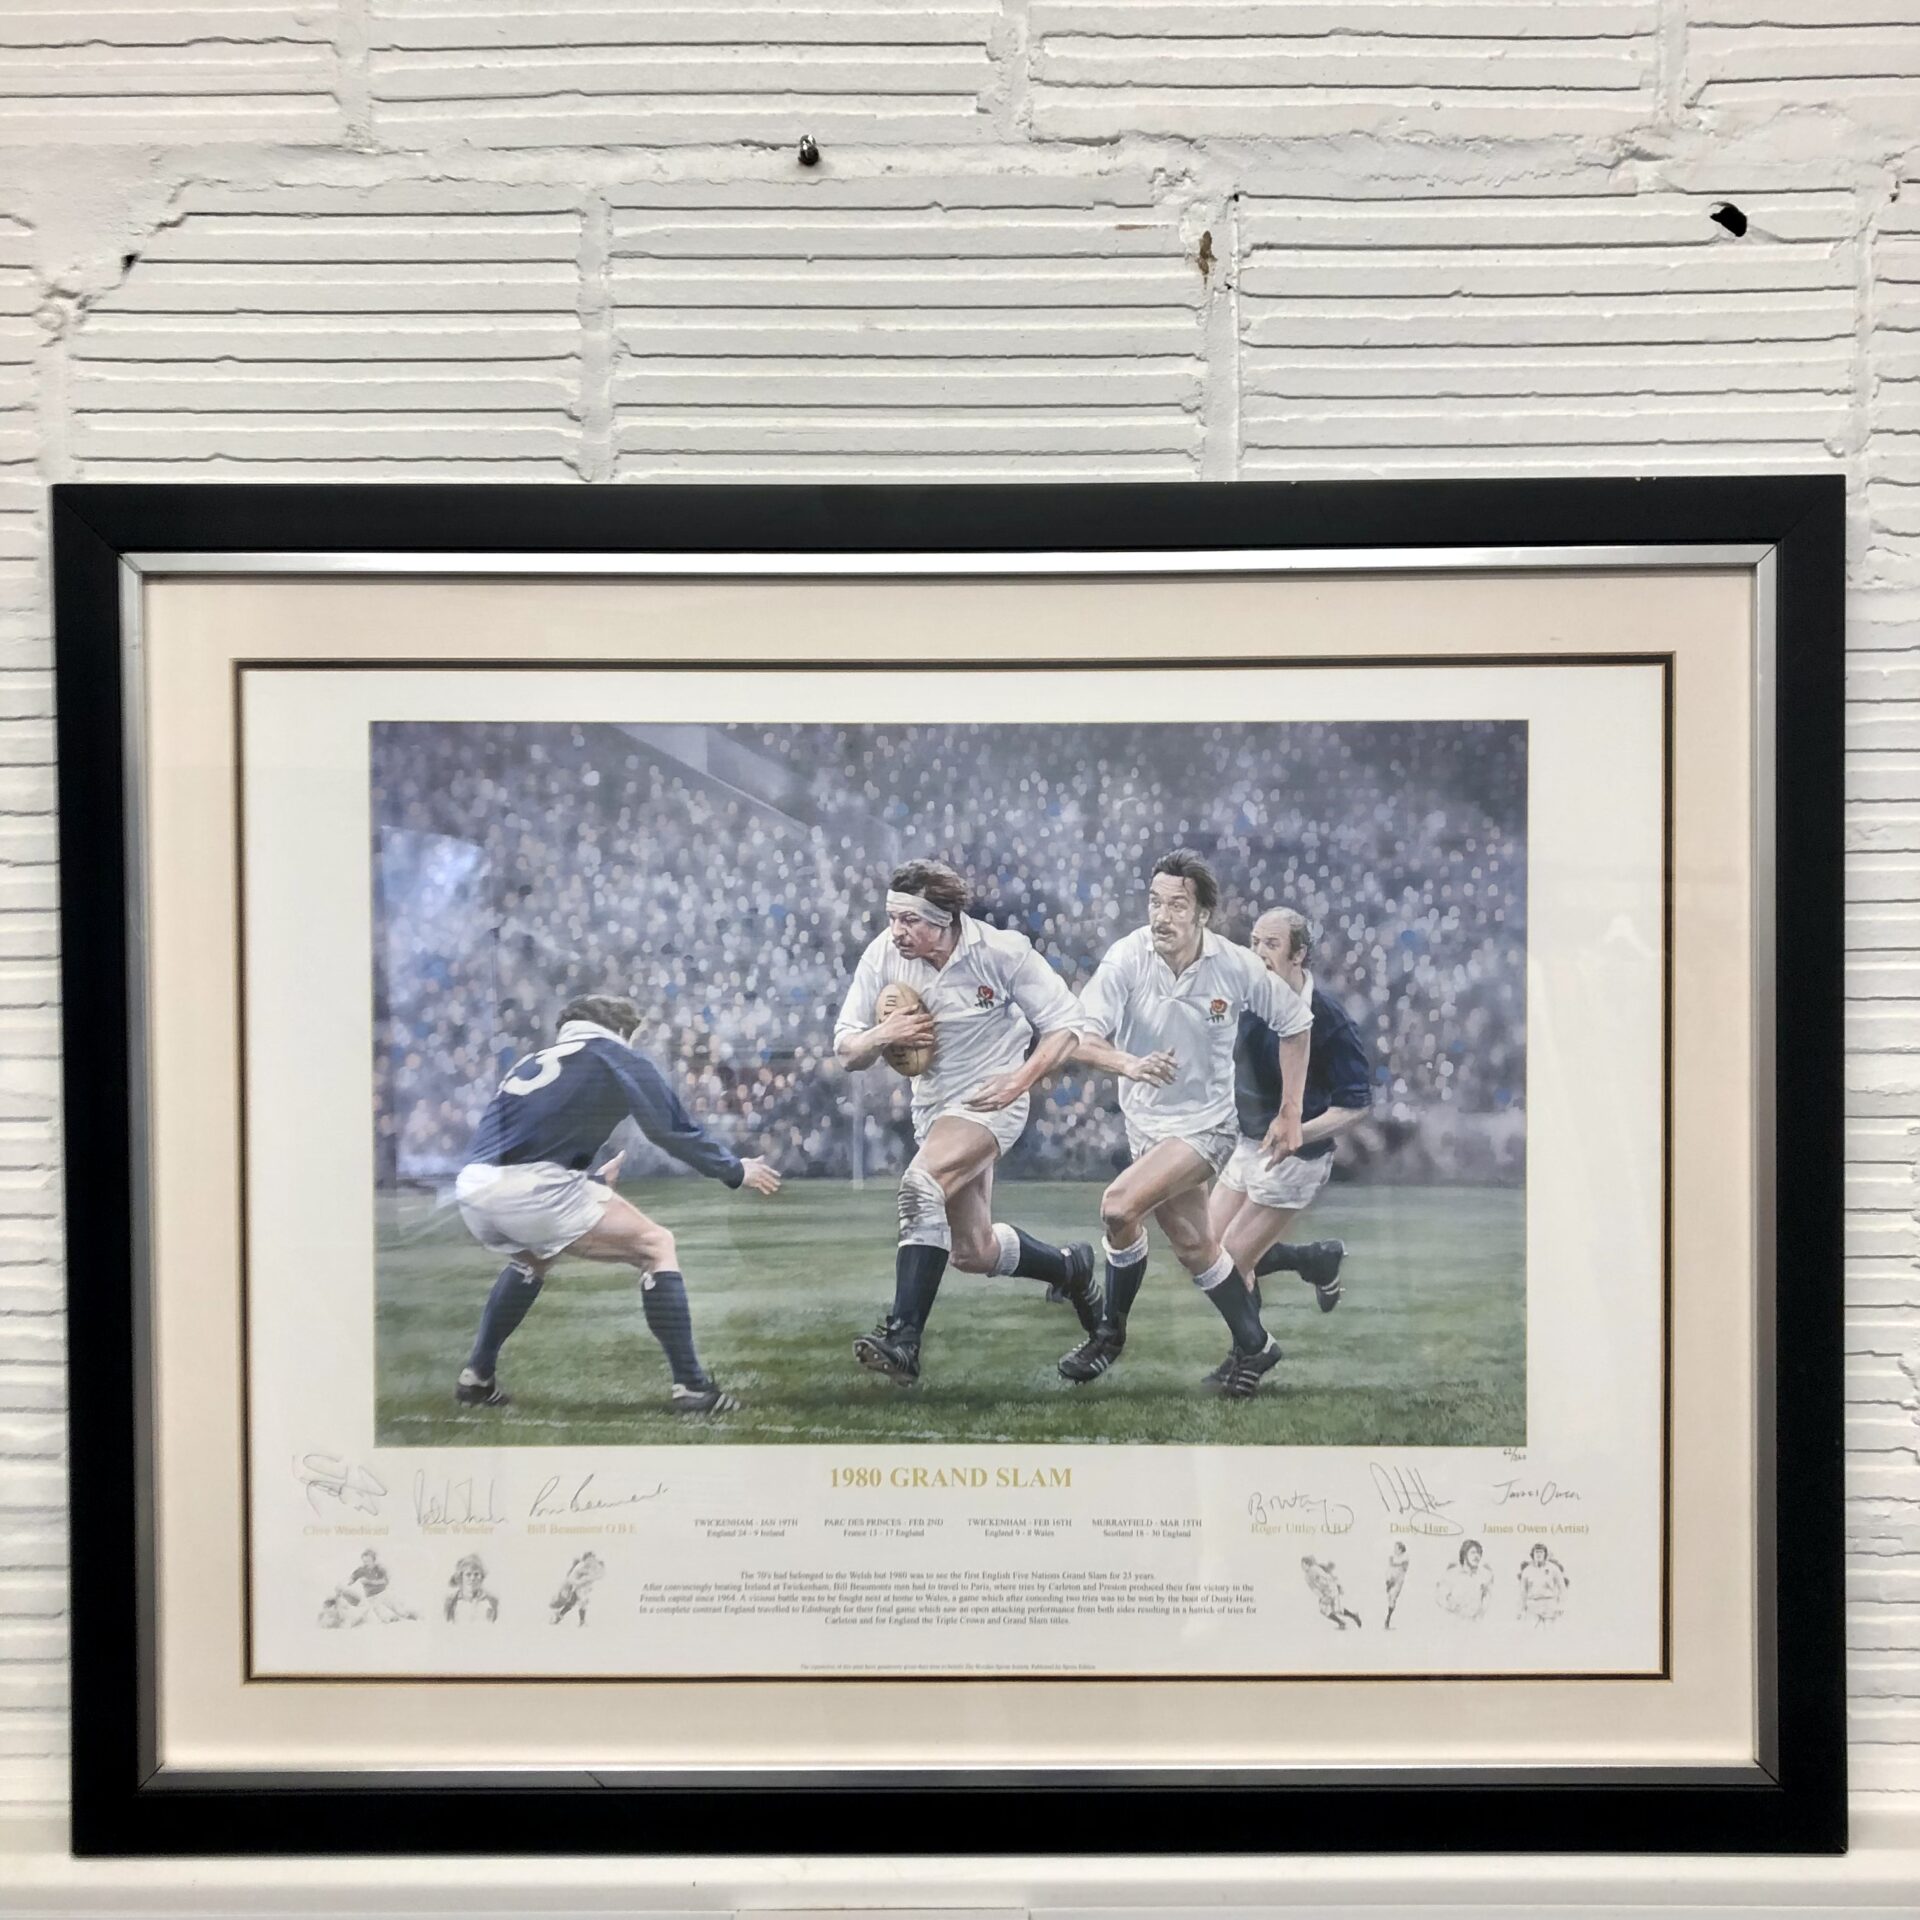 1980 Rugby Grand Slam by James Owen Limited Edition Signed Poster